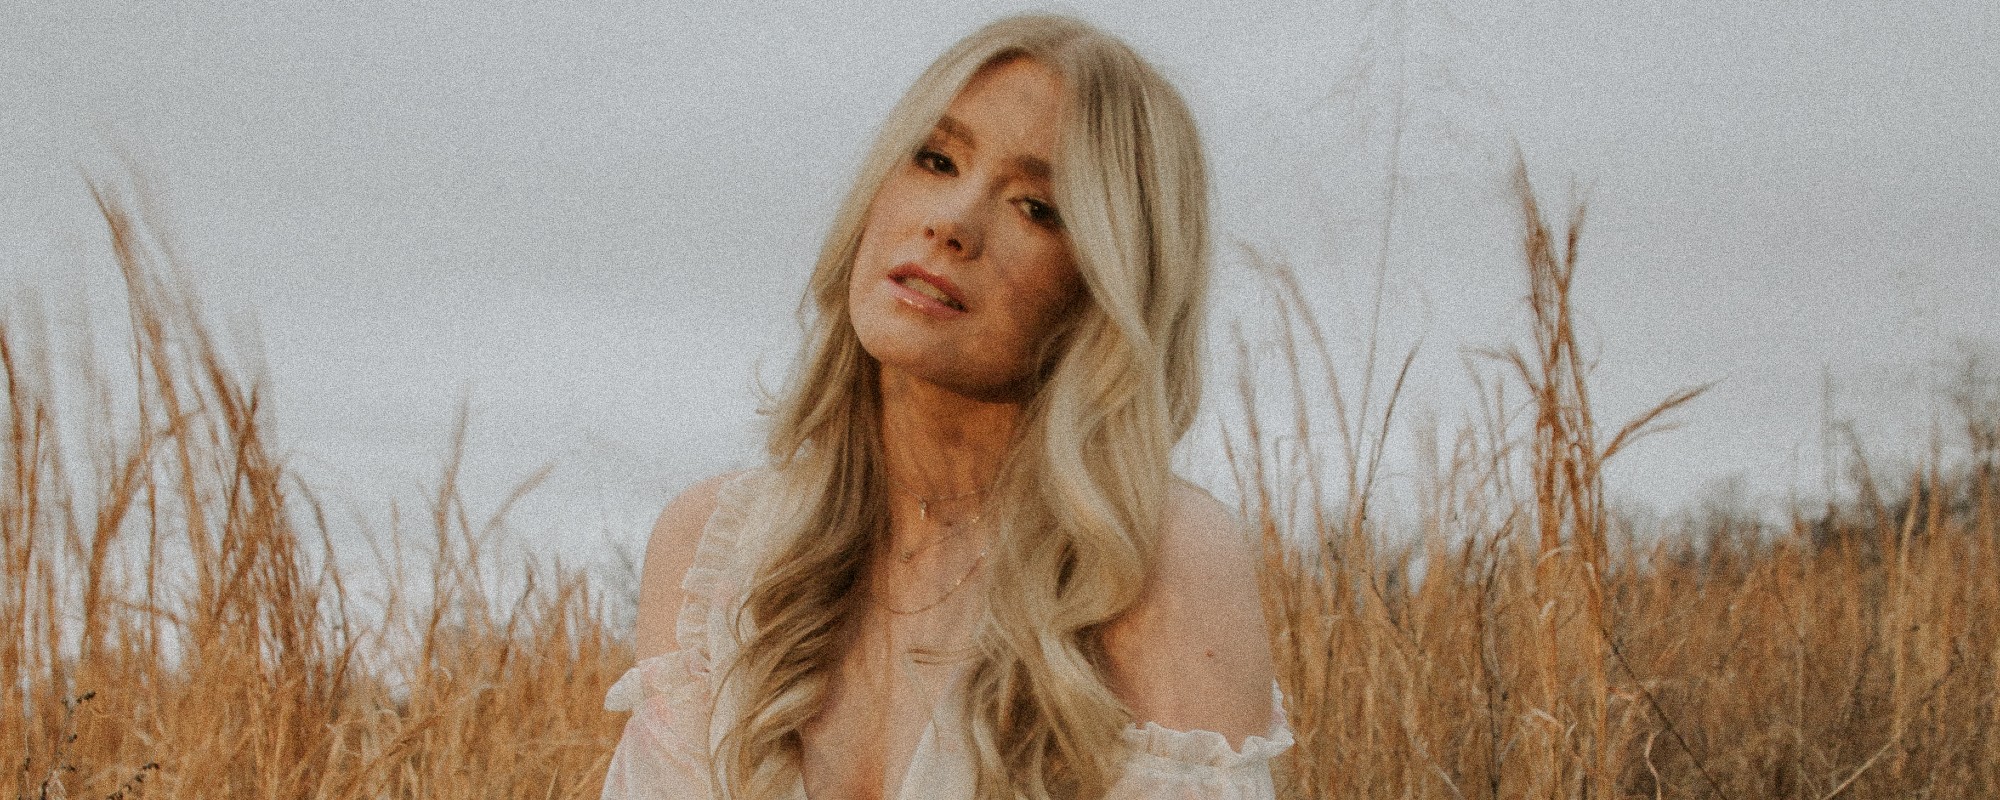 Emily Brooke Finds Viral Success With New Song, “Easy On Me”